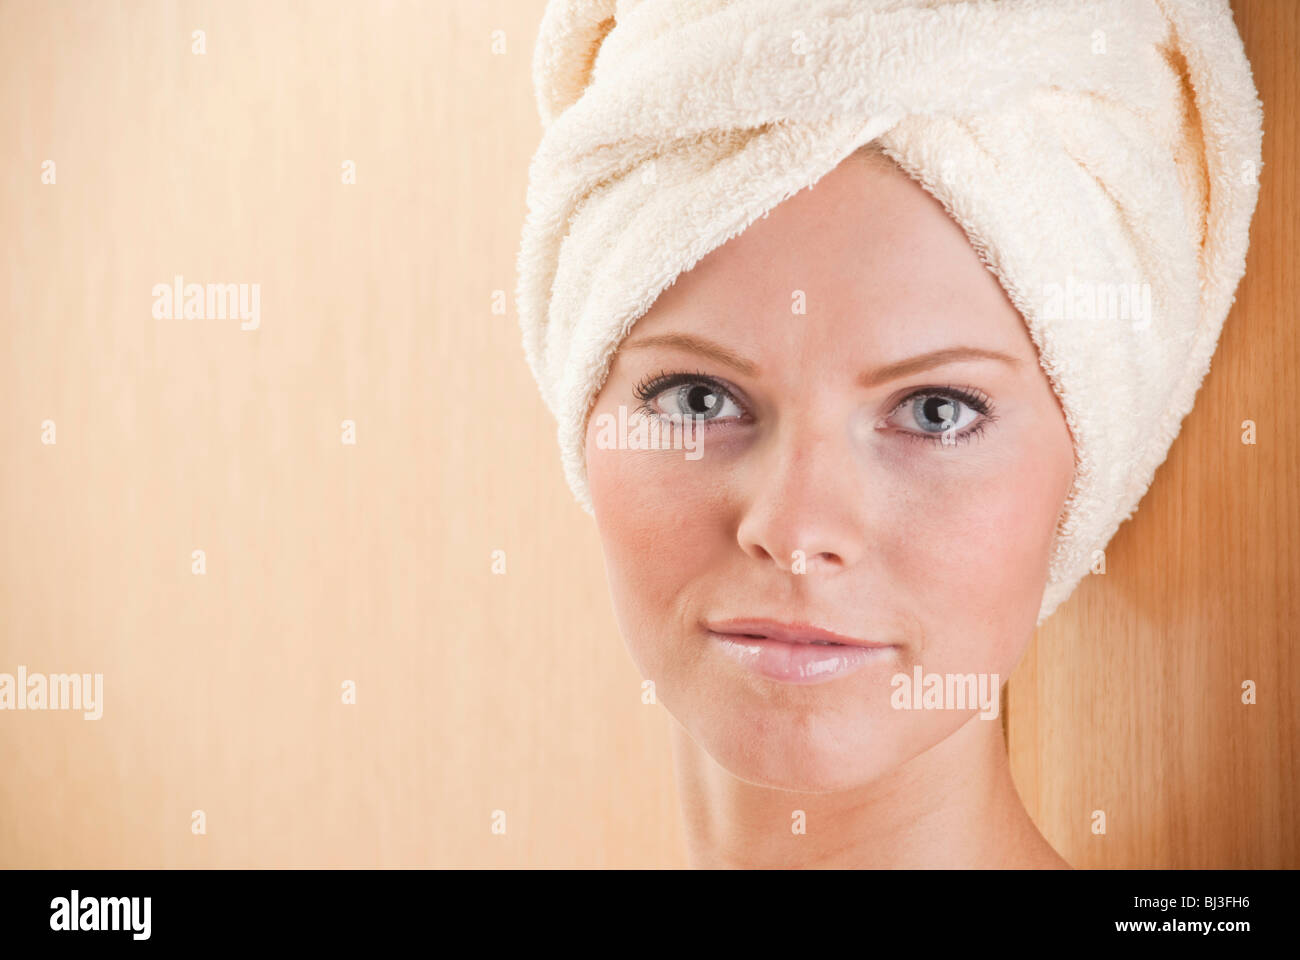 Young woman with a towel wrapped around her head Stock Photo